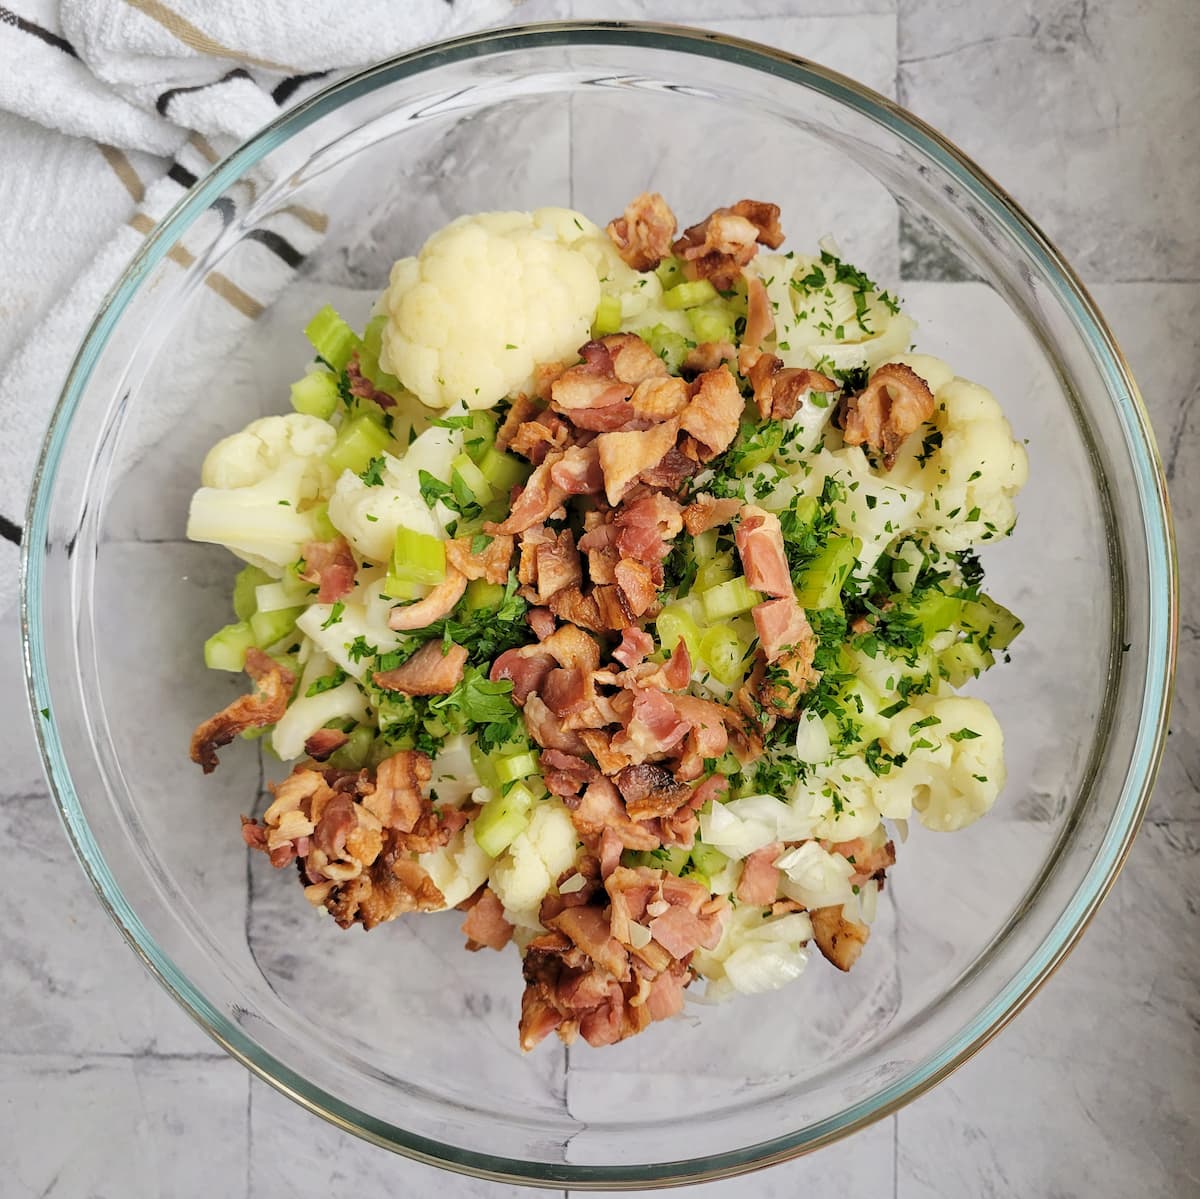 chopped bacon, celery, onions, parsley and cauliflower florets in a bowl